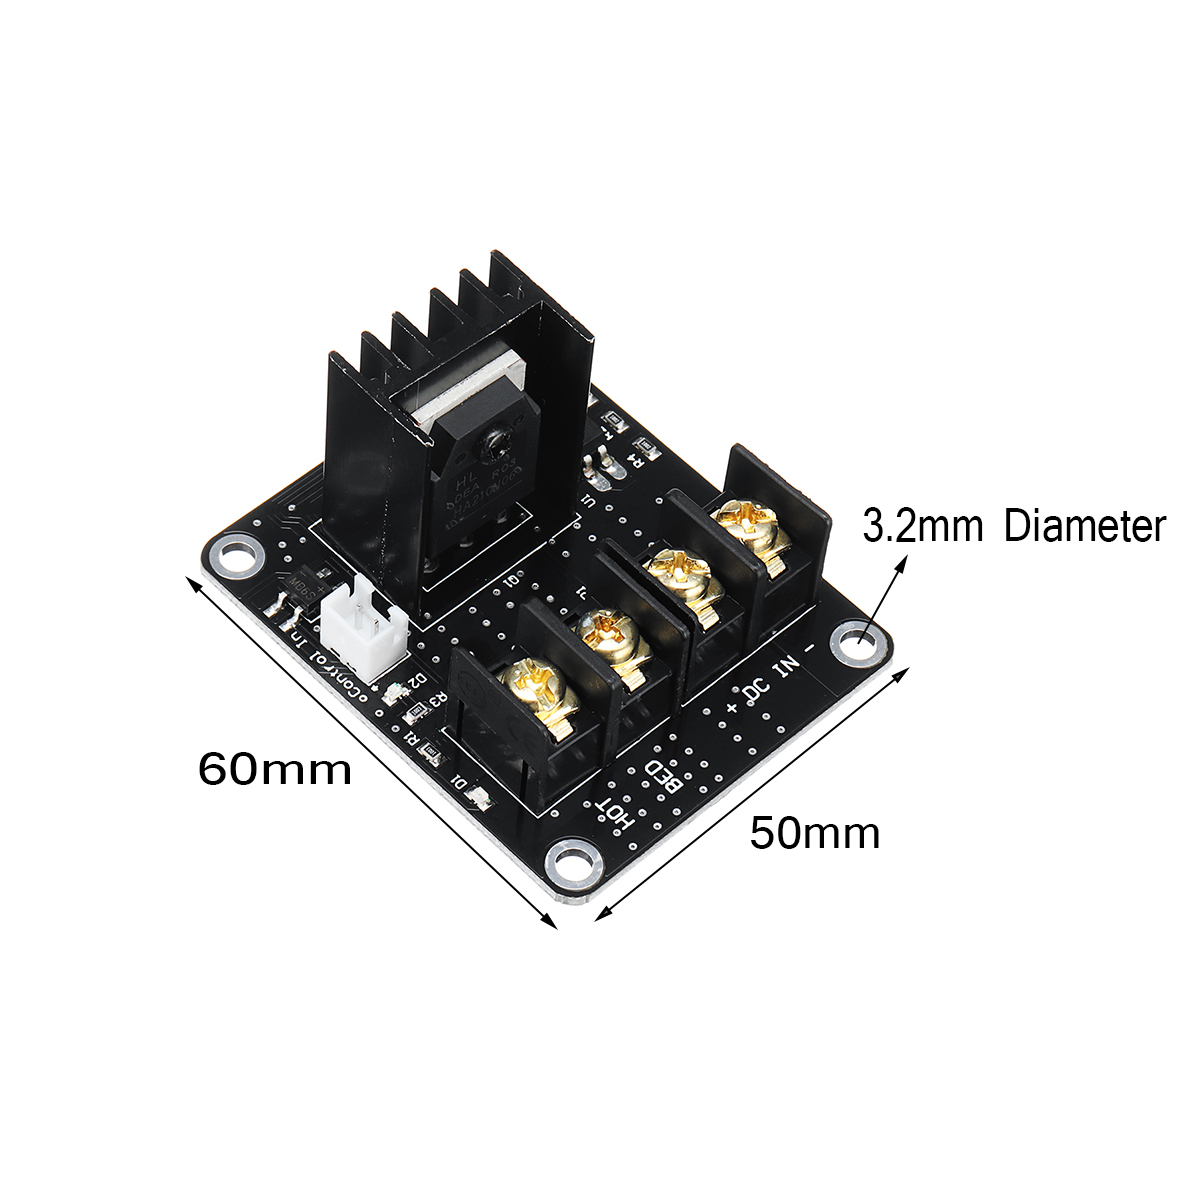 MOSFET High Power Heated Bed Expansion Power Module MOS Tube for 3D Printer Prusa i3 Anet A8/A6 12